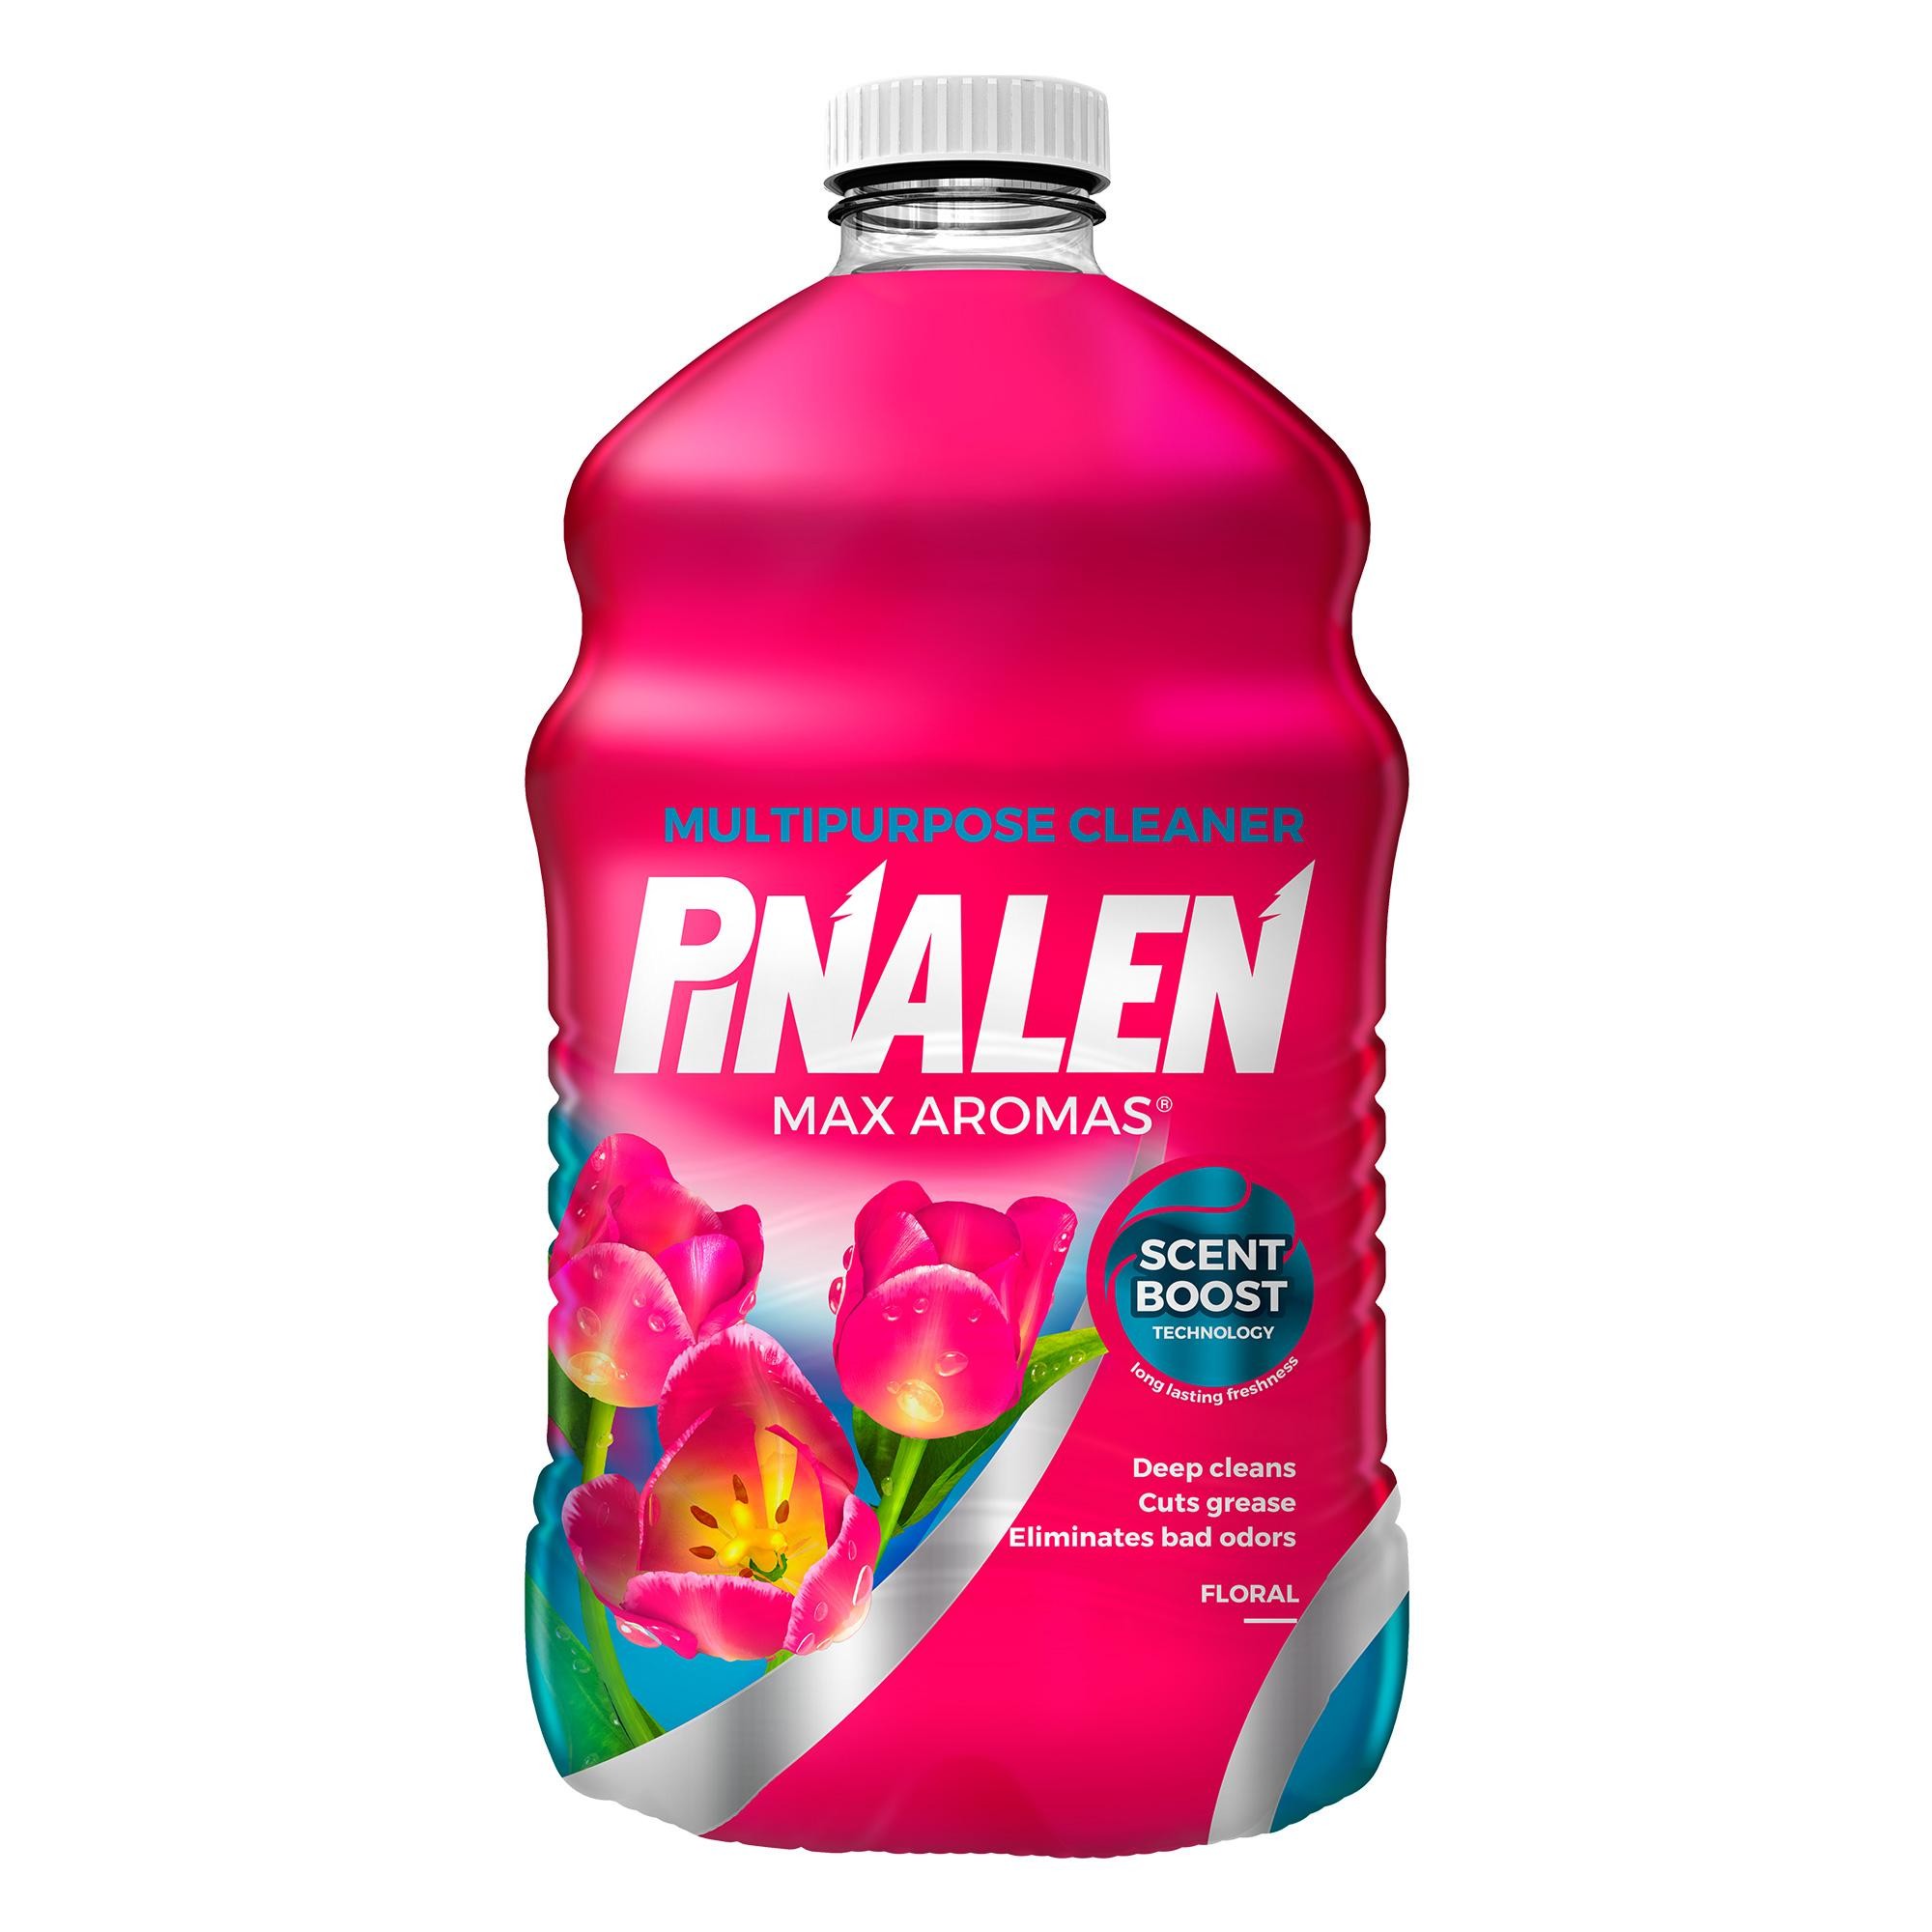 PINALEN Max AromasÂ® Multipurpose Cleaner, Floral, 128 Fl. Oz. with Scent Boost Technology